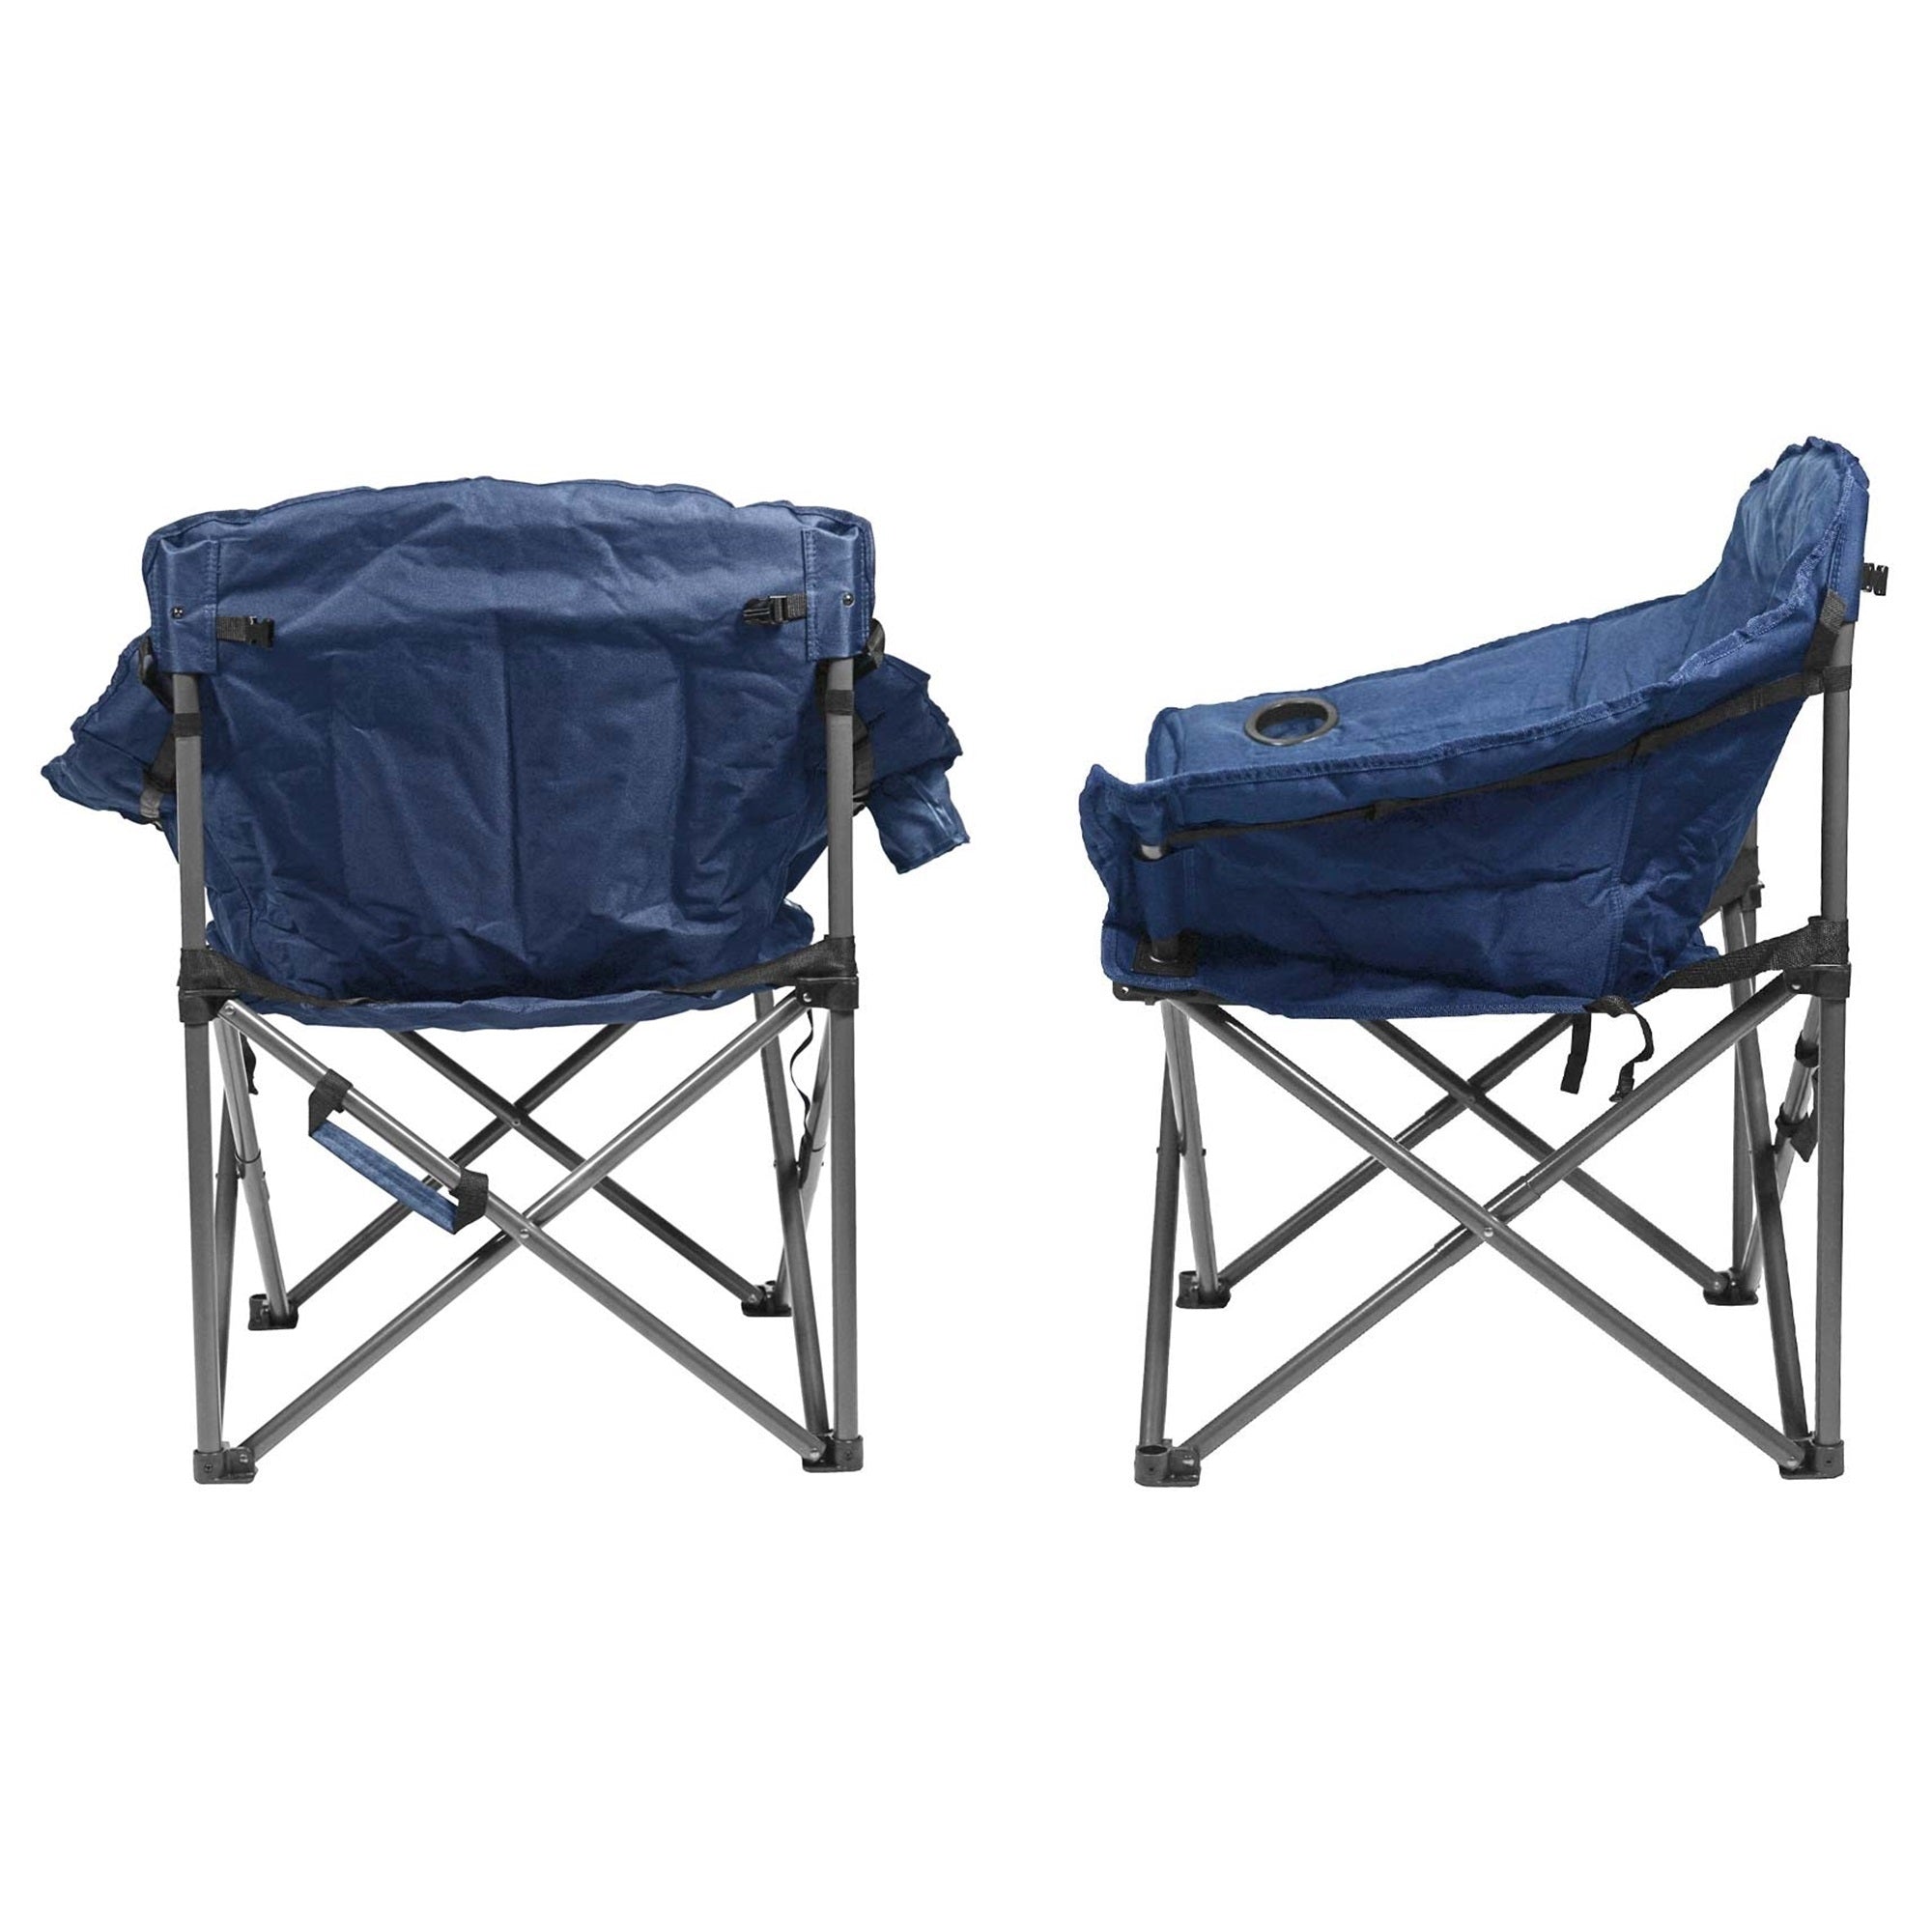 Zenithen Limited Alternative Club Portable Folding Outdoor Camping Chair, Navy Blue